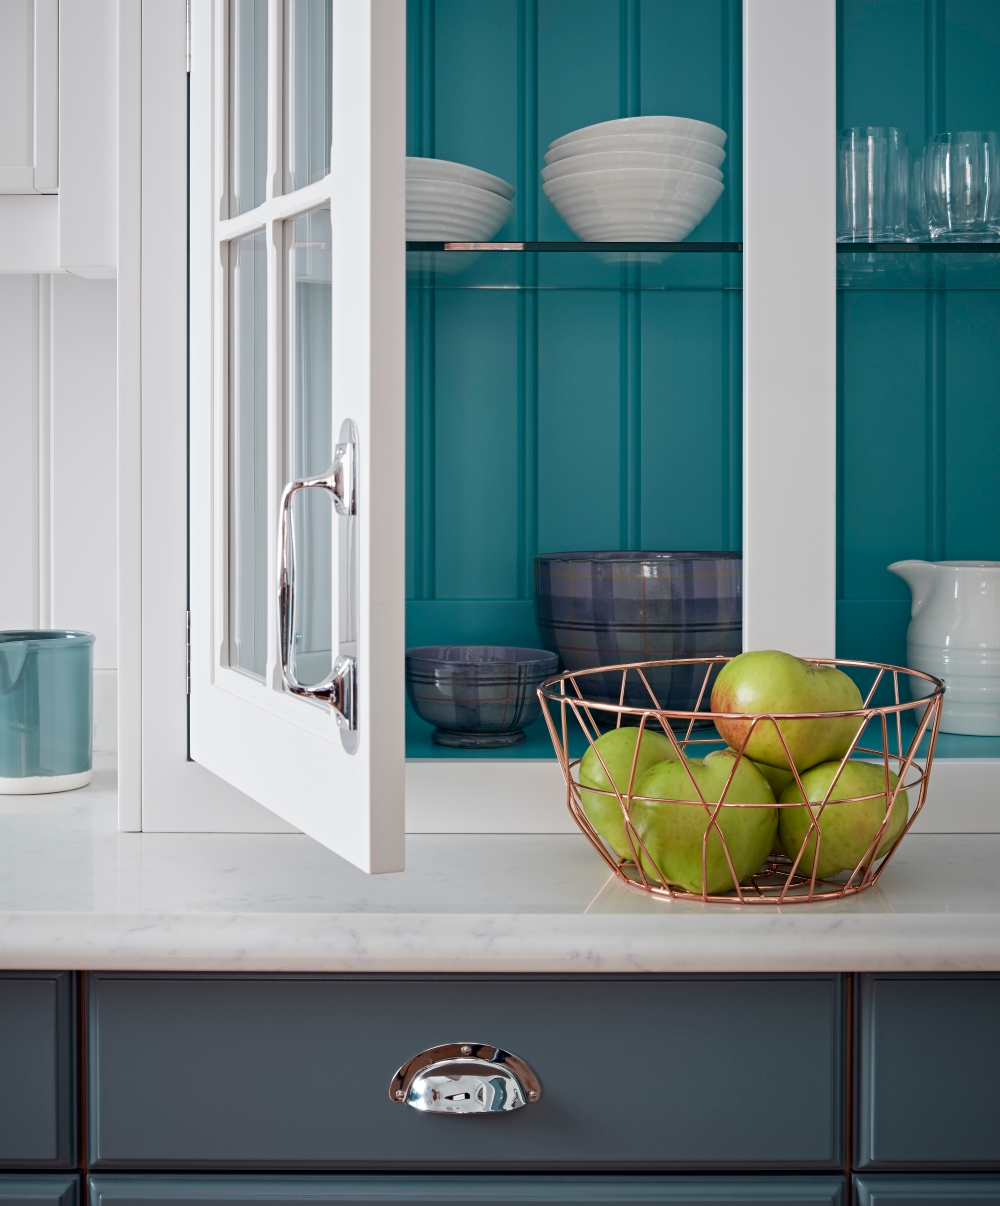 Cupboard Interior in Persian Green | John Lewis of Hungerford